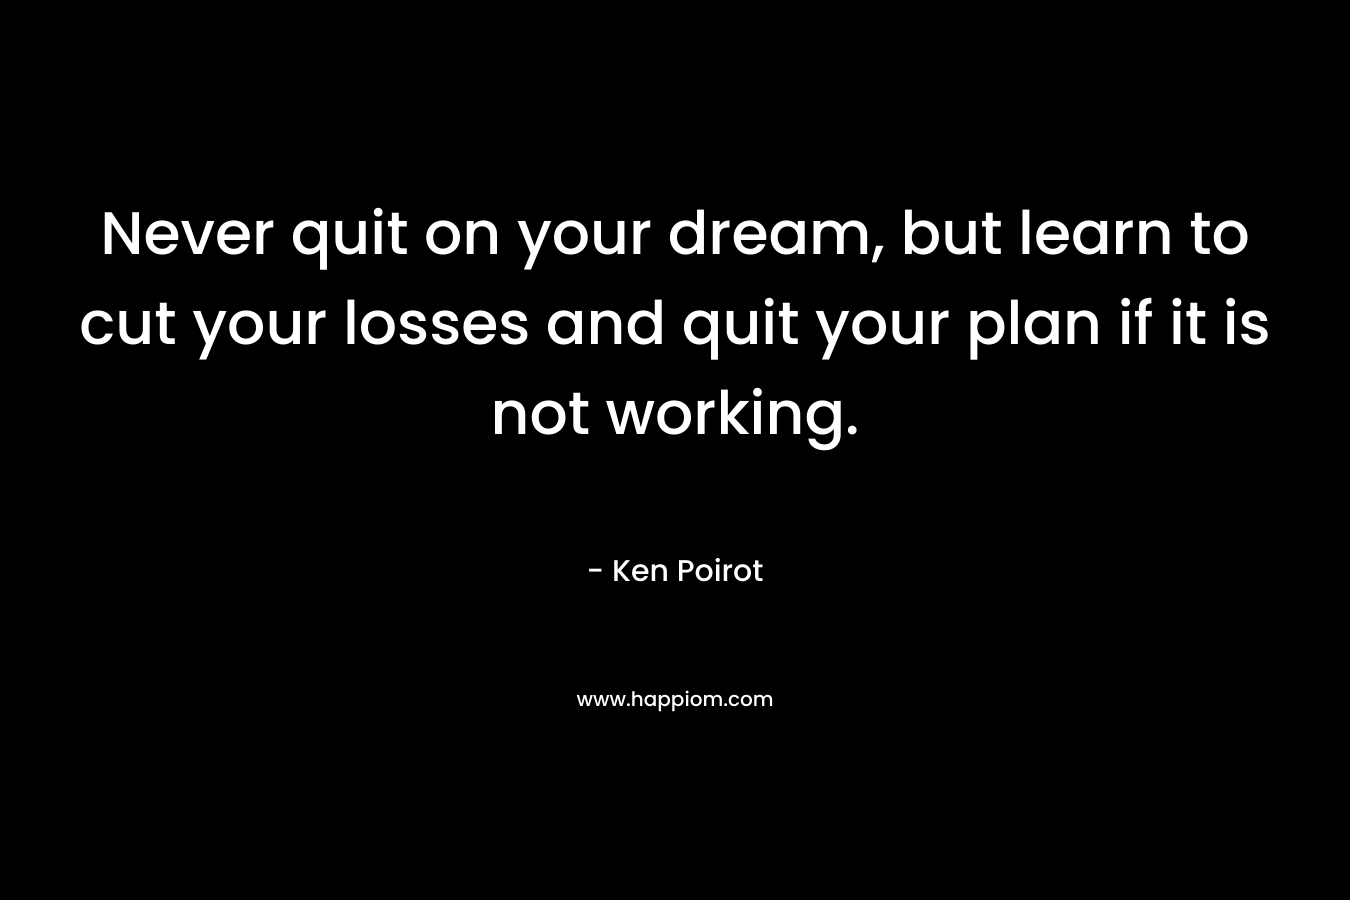 Never quit on your dream, but learn to cut your losses and quit your plan if it is not working.